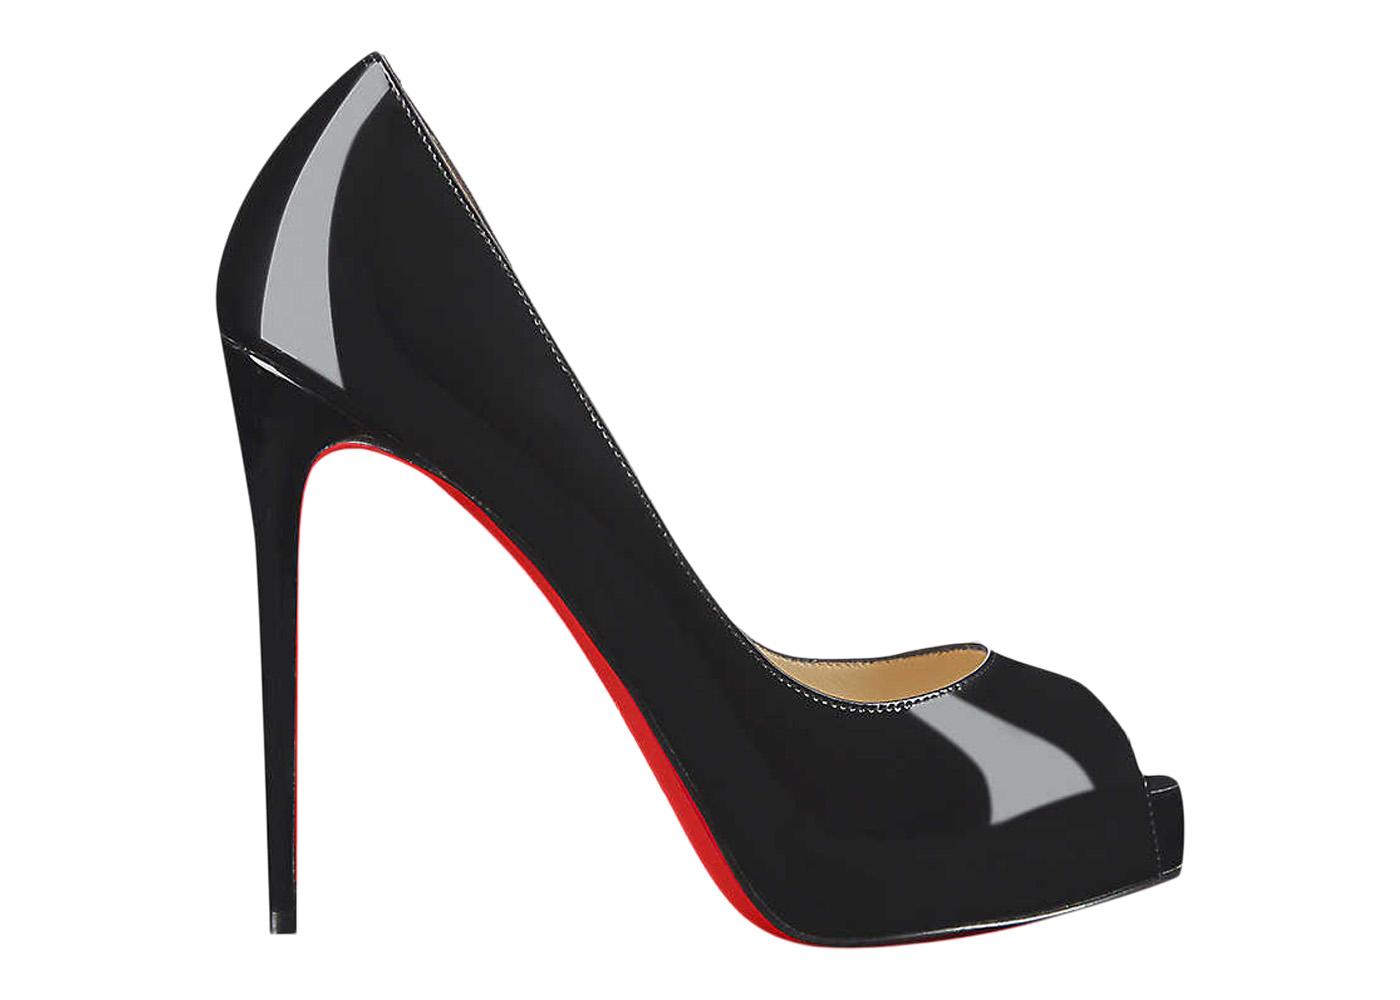 Christian Louboutin New Very Prive 120 Pump Black Patent Leather